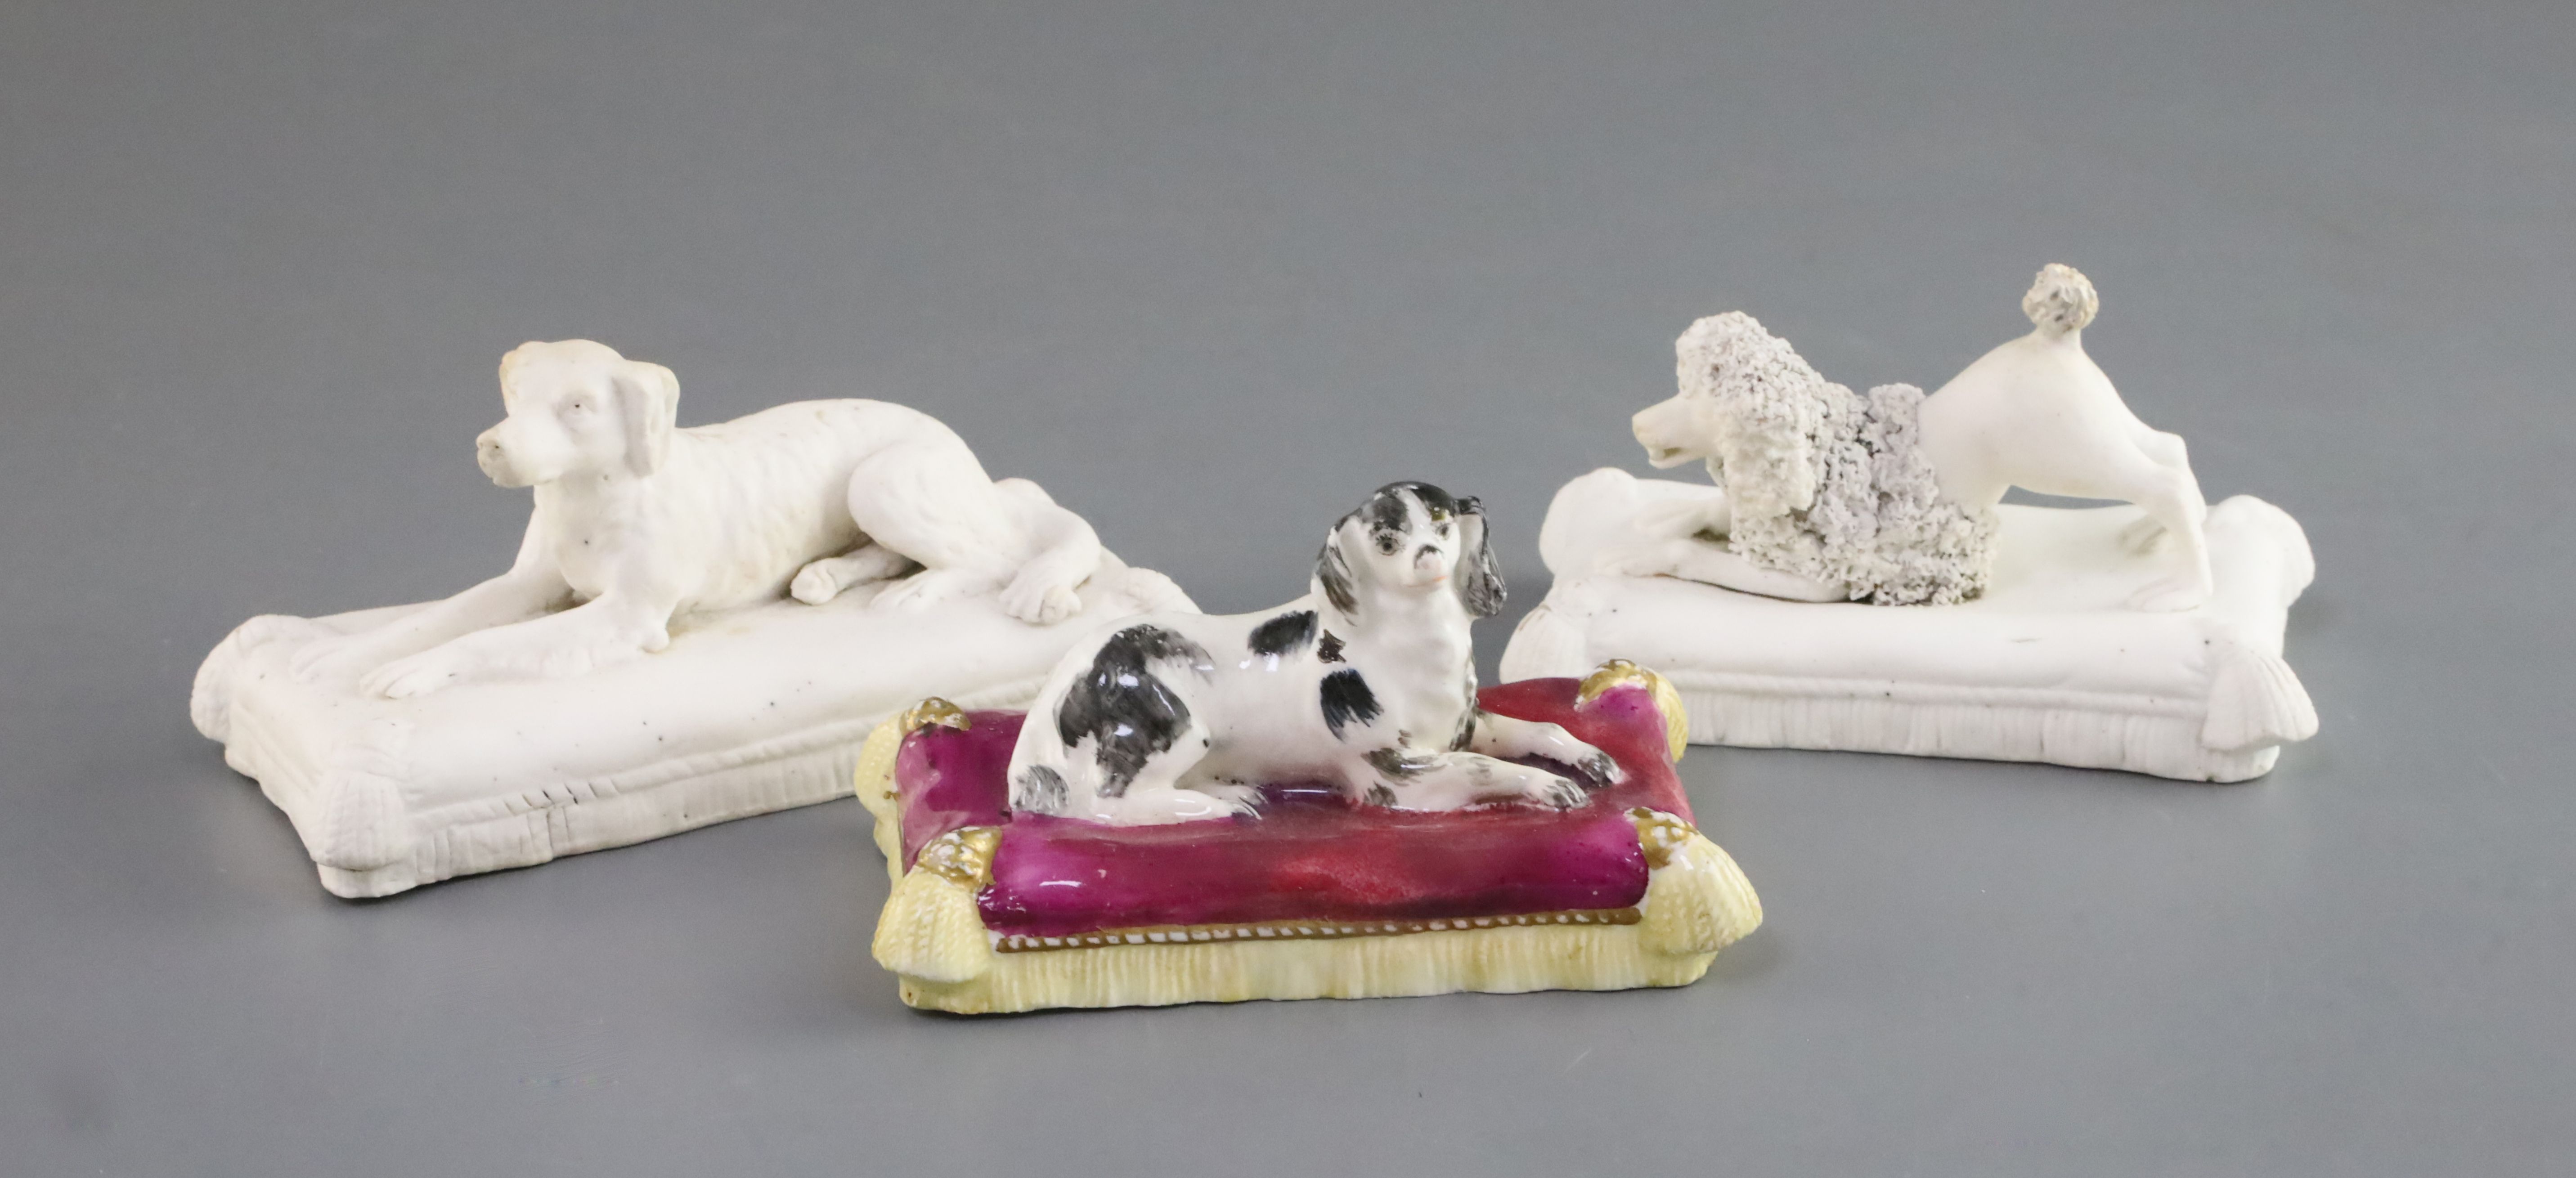 Three Minton porcelain figures of recumbent dogs on tasselled cushions, c.1831-40, the first a